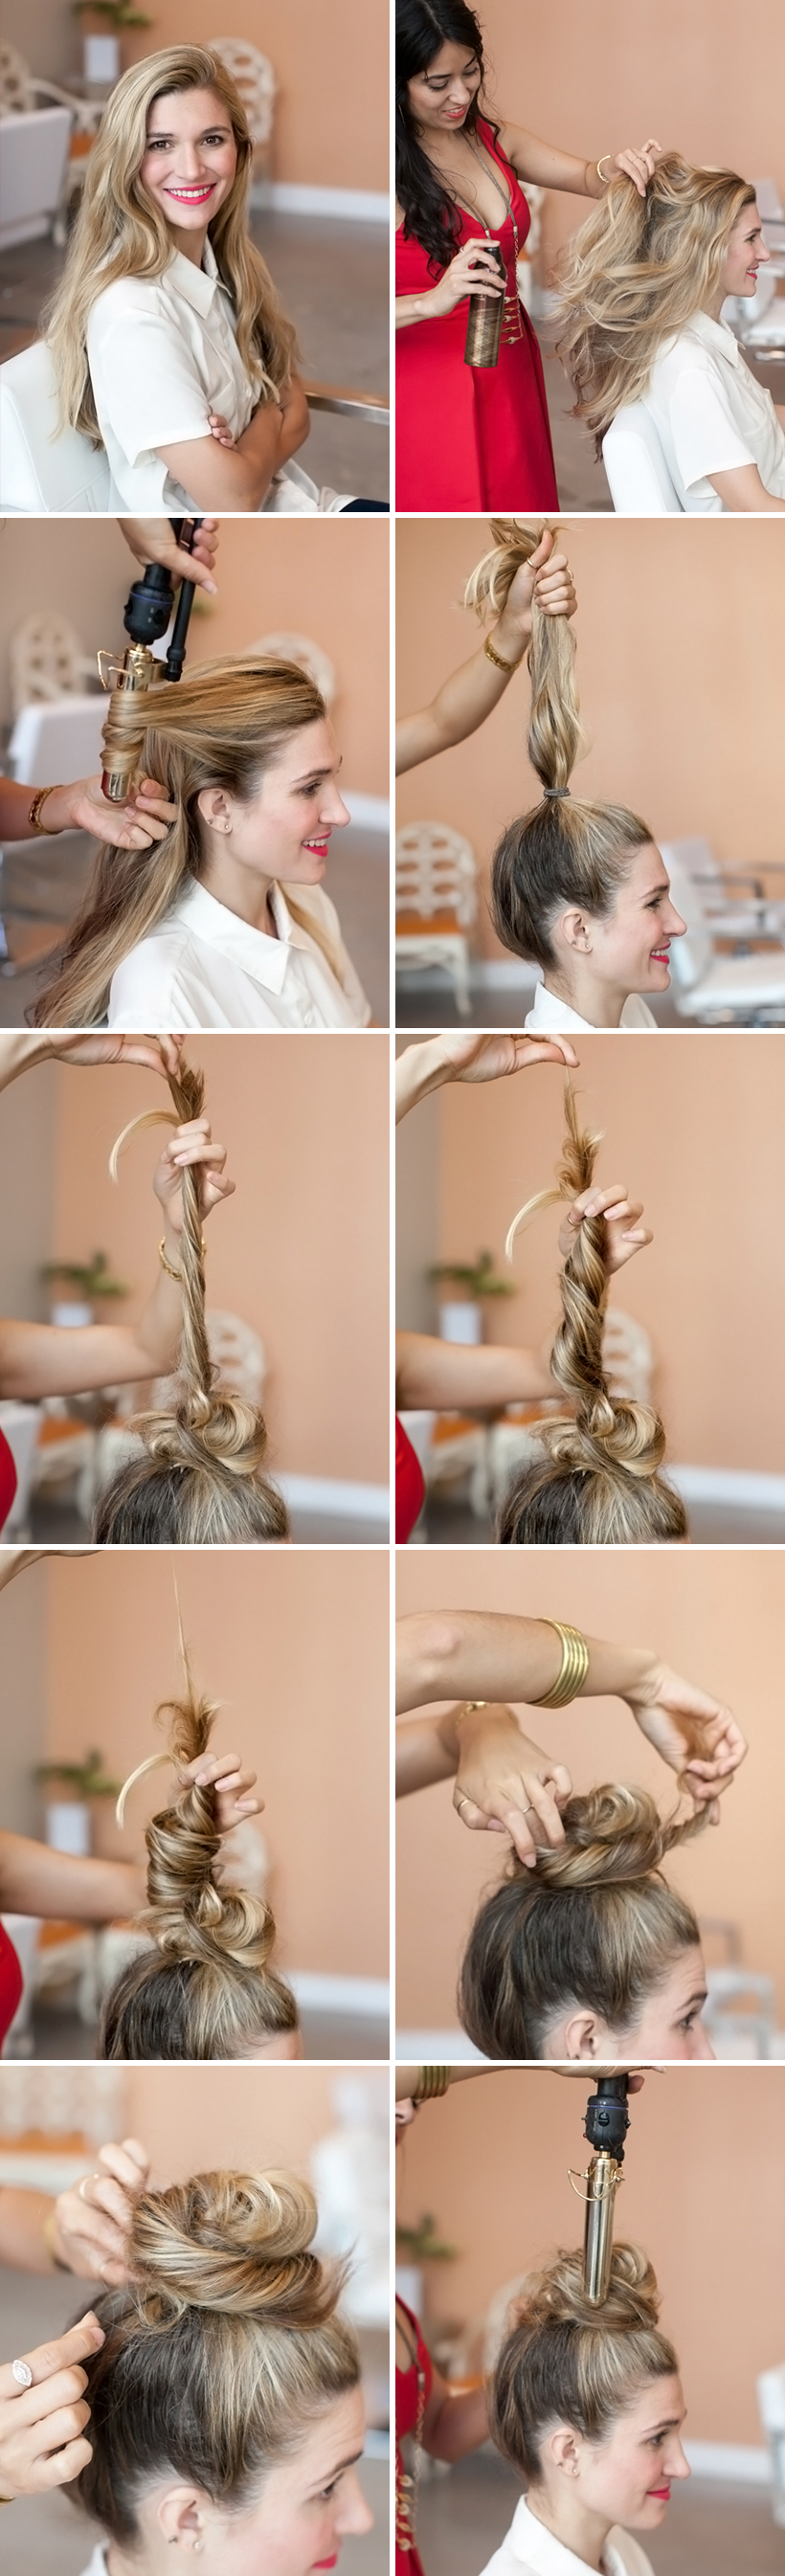 Easy Messy Hairstyles You Can Do In 5 Minutes